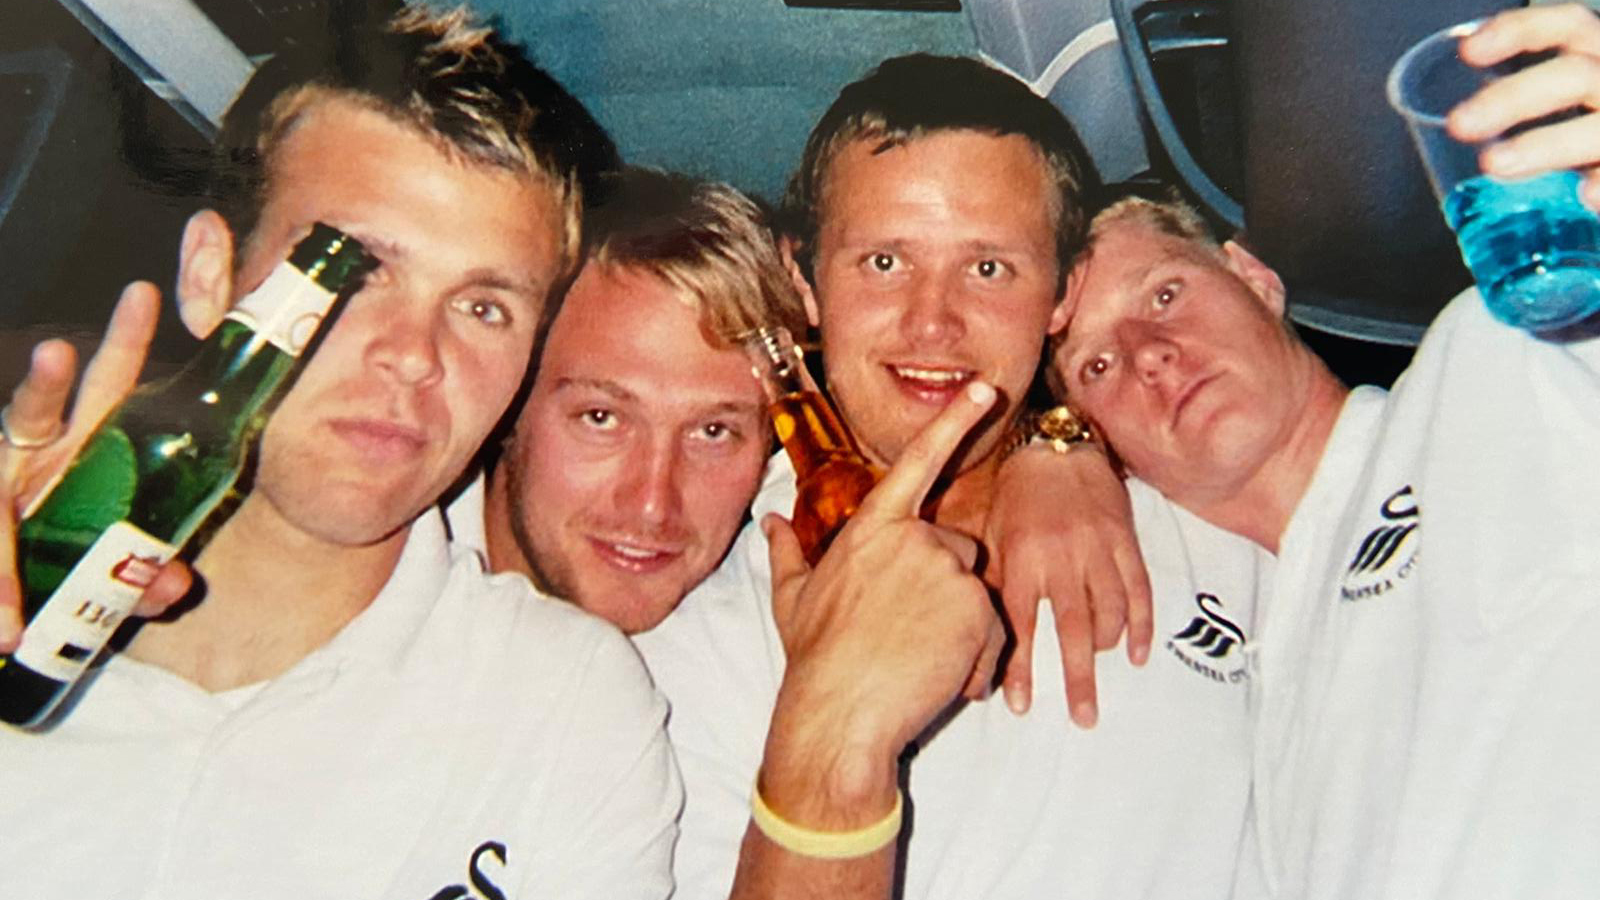 Brian Murphy, Paul Connor, Lee Trundle and Alan Tate. Photo courtesy of Lee Trundle